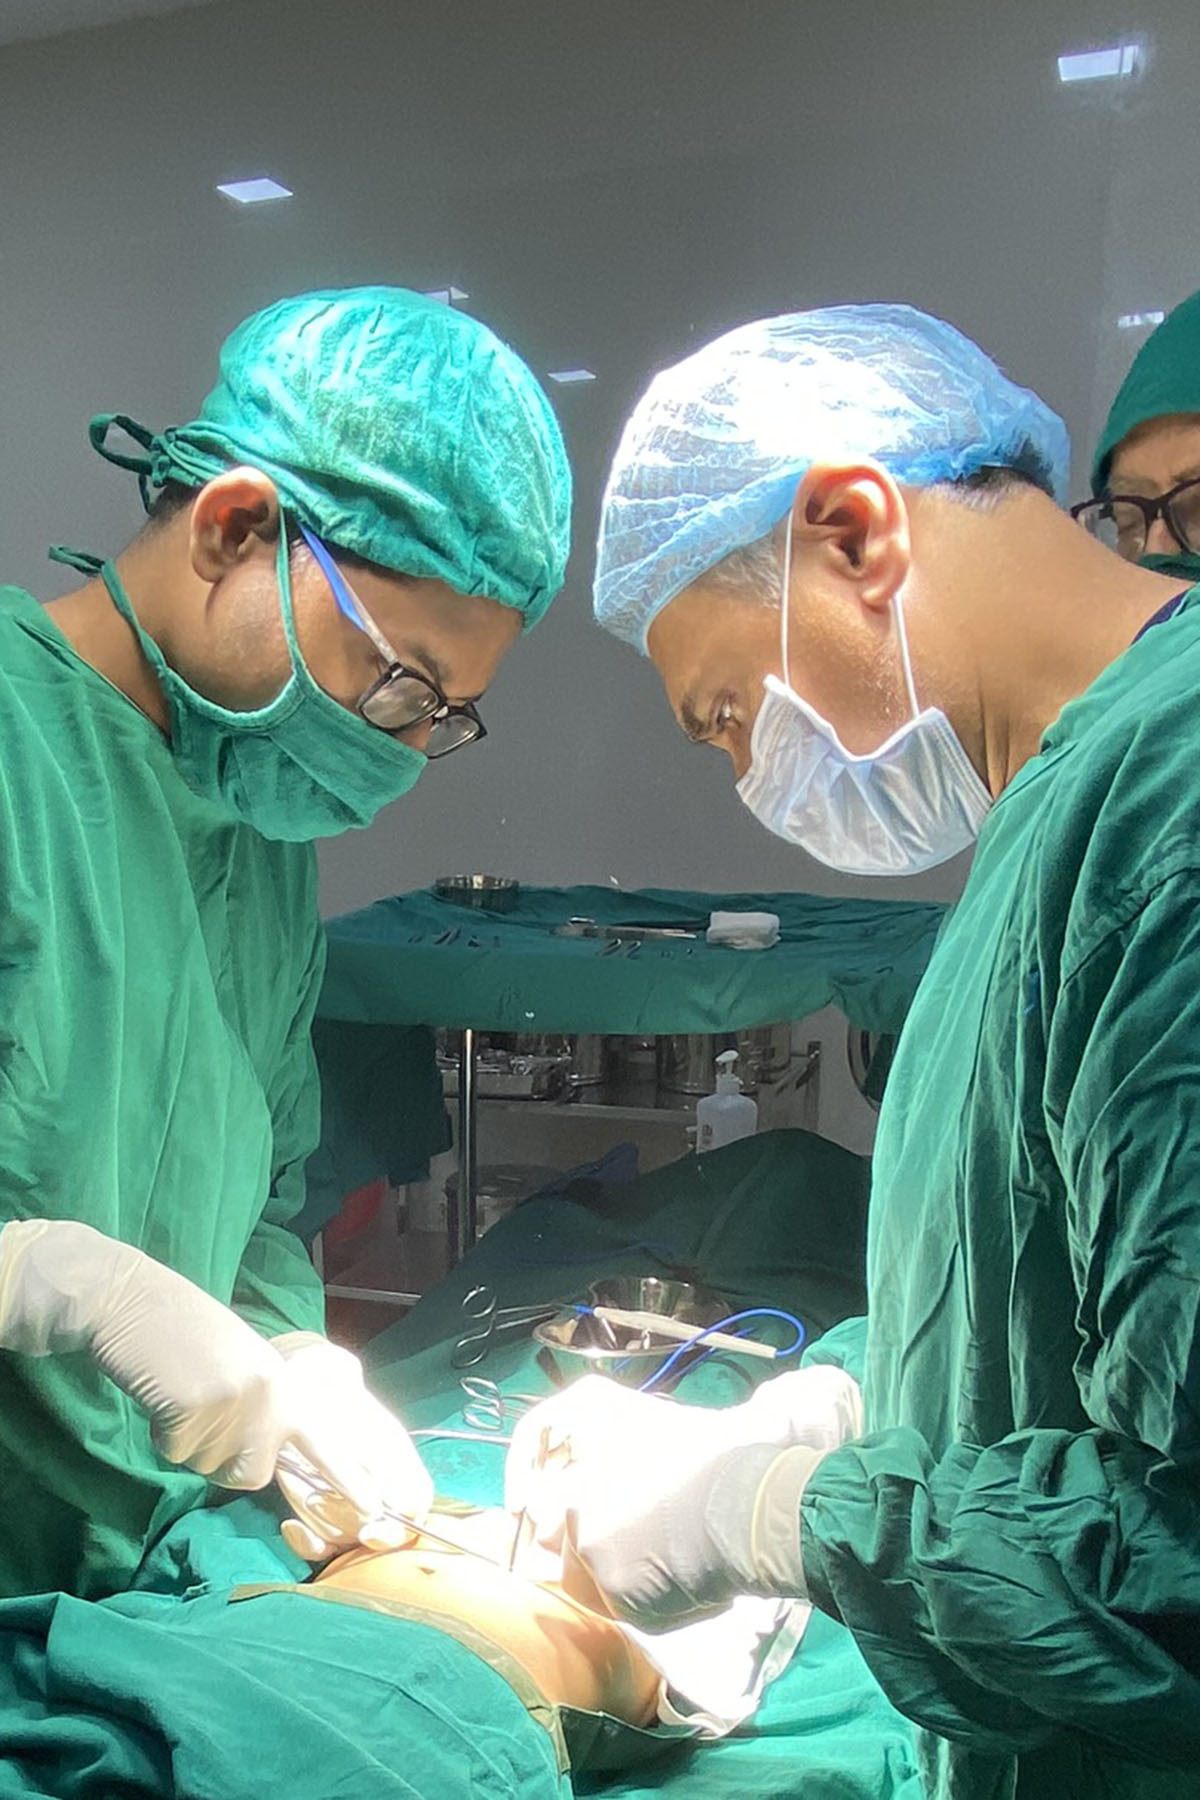 The Surgicalist Group Founder, CEO Aids Patients in Borsad, India Through Mission Work